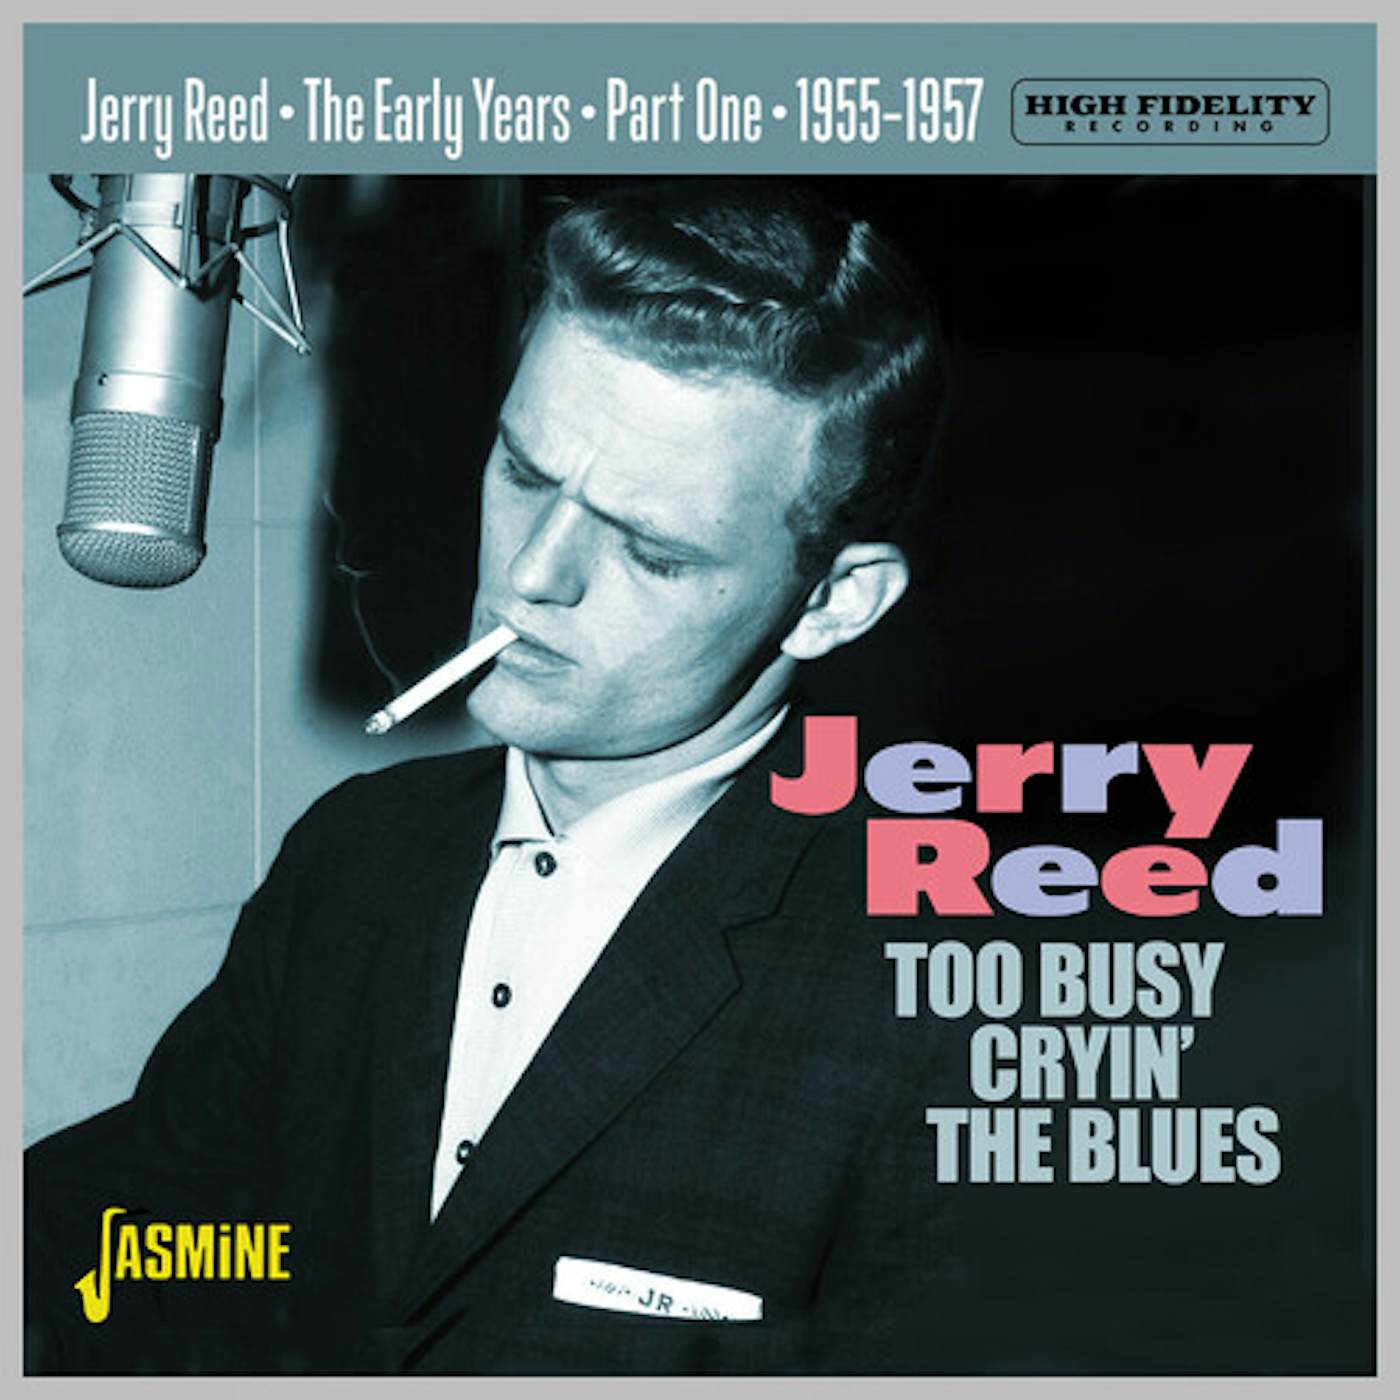 Jerry Reed EARLY YEARS PART 1: TOO BUSY CRYIN THE BLUES 55-57 CD